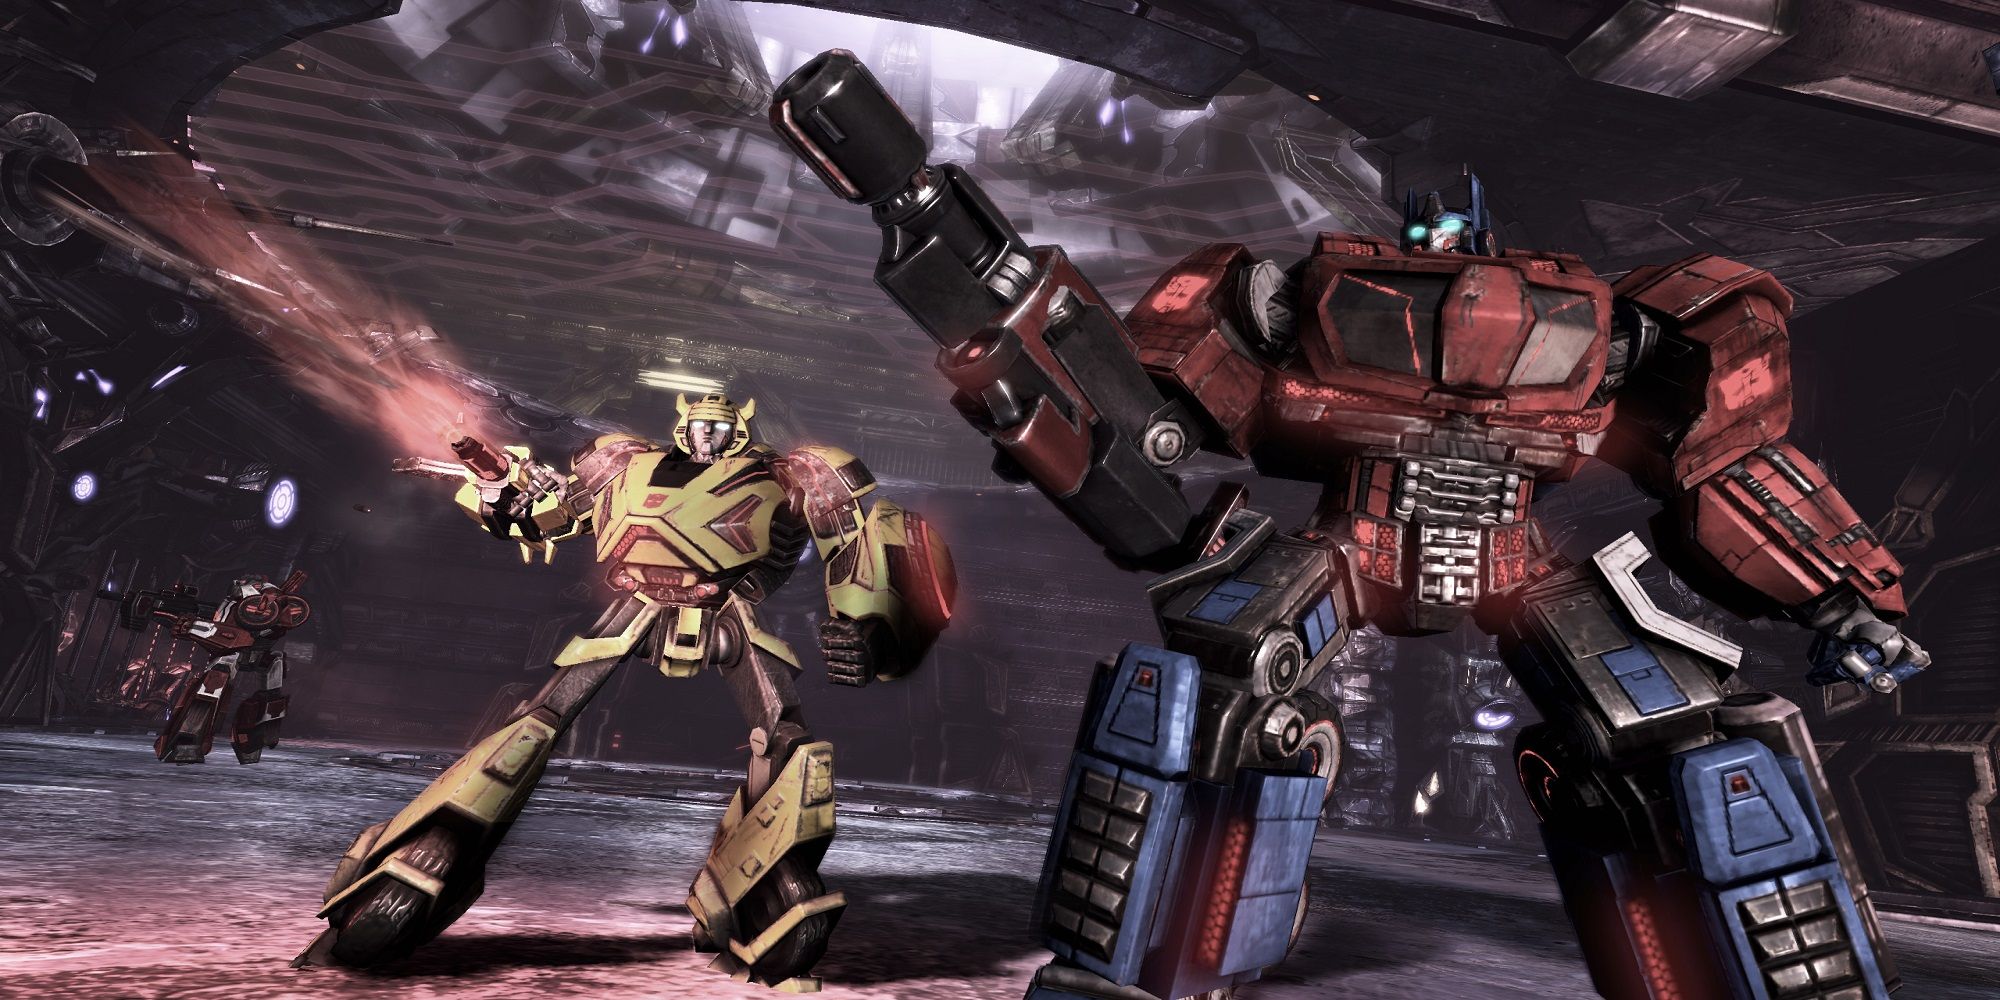 download free transformers war for cybertron siege